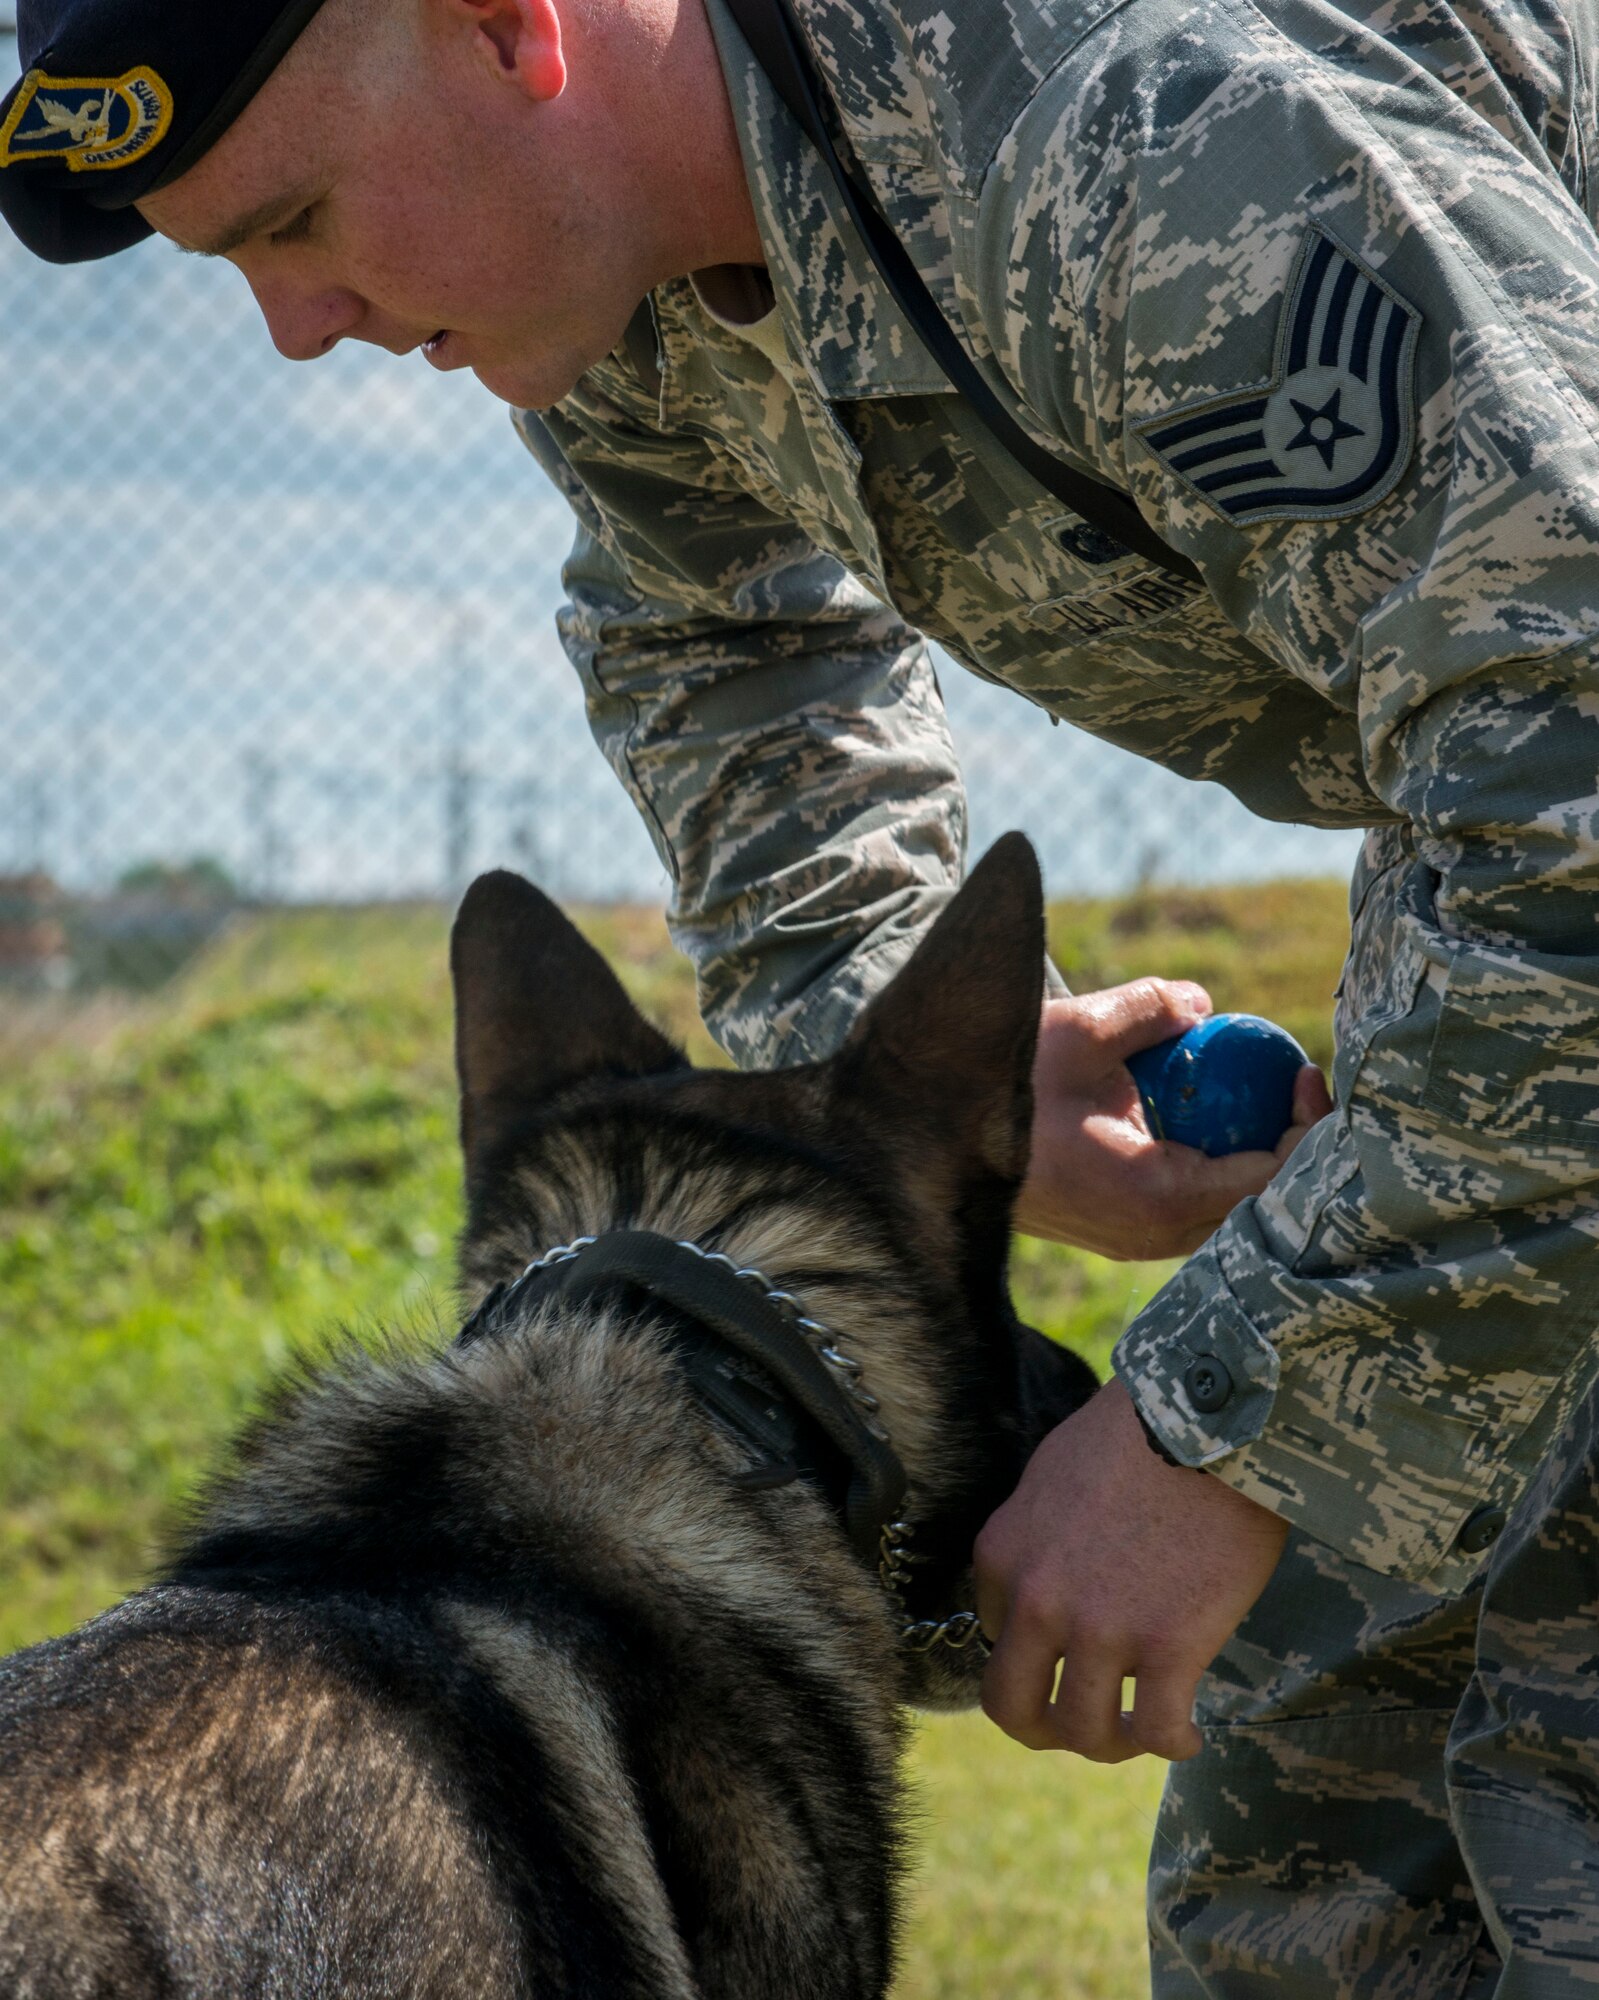 Staff Sgt. Tim Glover, 5th Security Forces Squadron military working dog handler, retrieves a toy from his MWD Roko during a game of fetch at the kennels on Minot Air Force Base, N.D., July 28, 2014. Glover recently completed the MWD handler’s course at Lackland AFB, Texas, and his primary focus upon arrival at Minot has been building a strong rapport with his dog. (U.S. Air Force photo/Senior Airman Stephanie Morris)